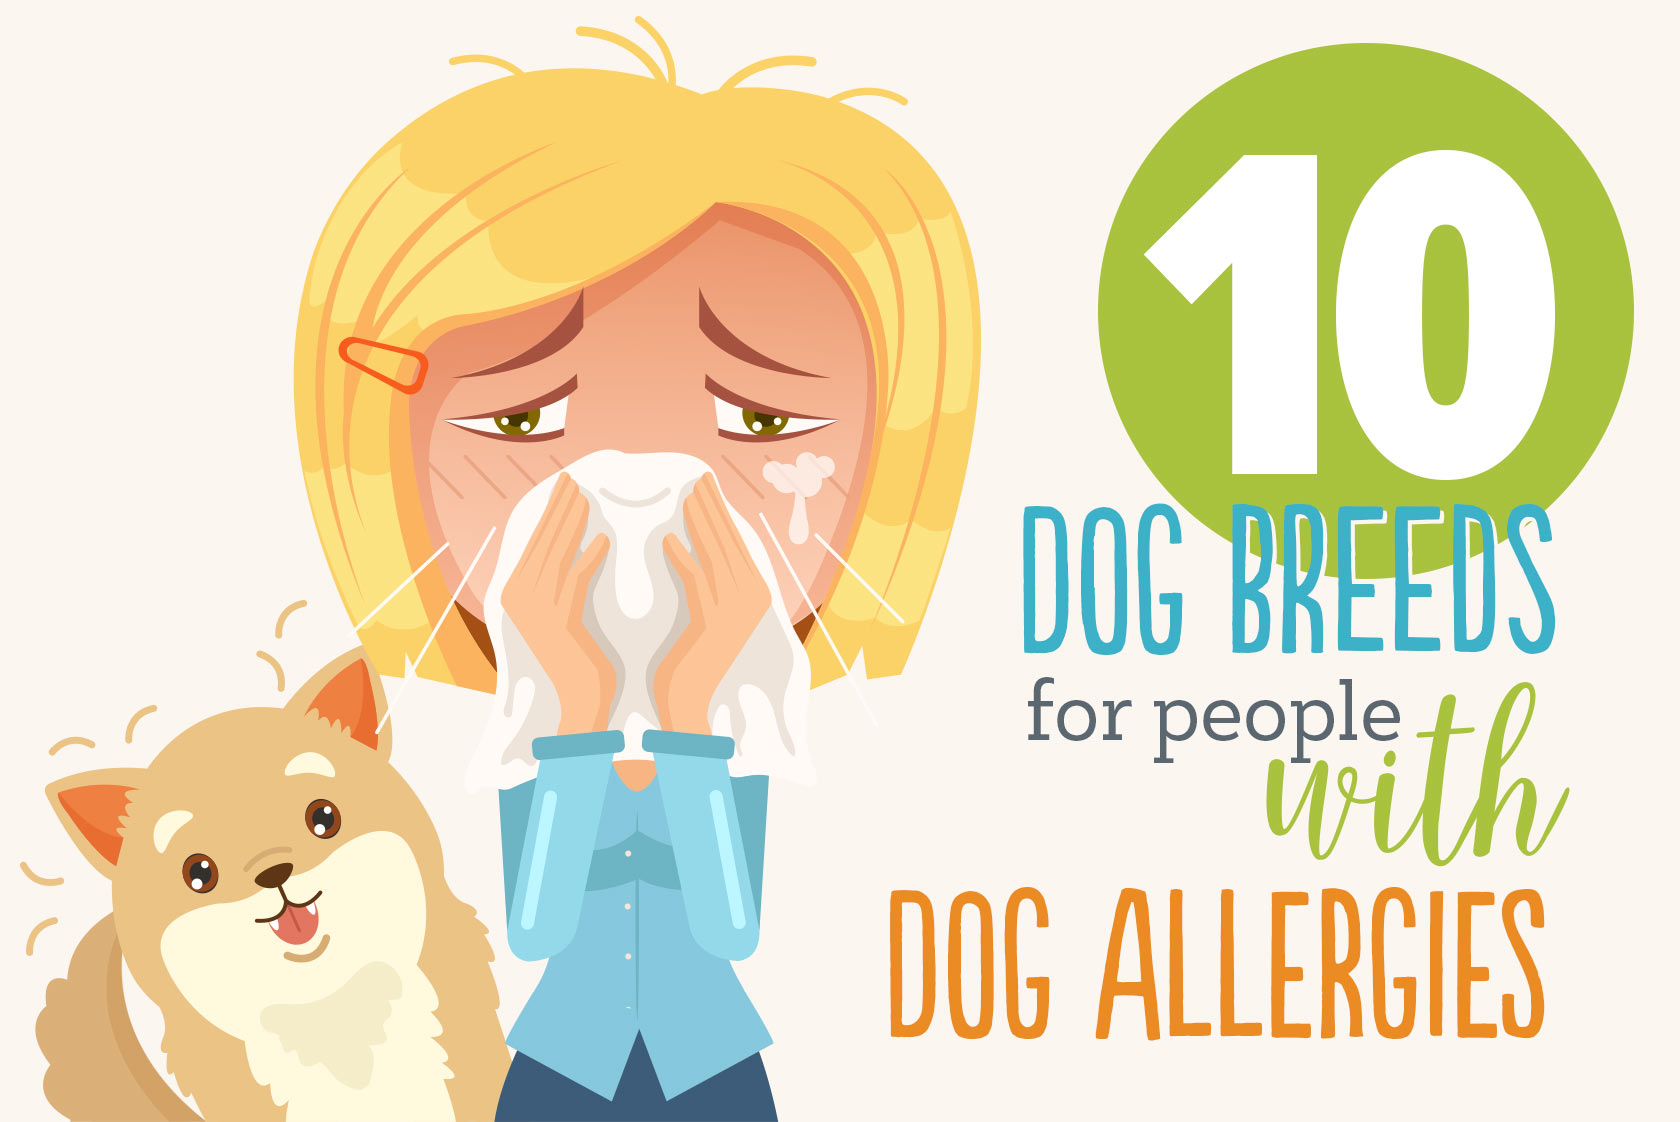 Oxyfresh - Top 10 dog breeds for people with dog allergies